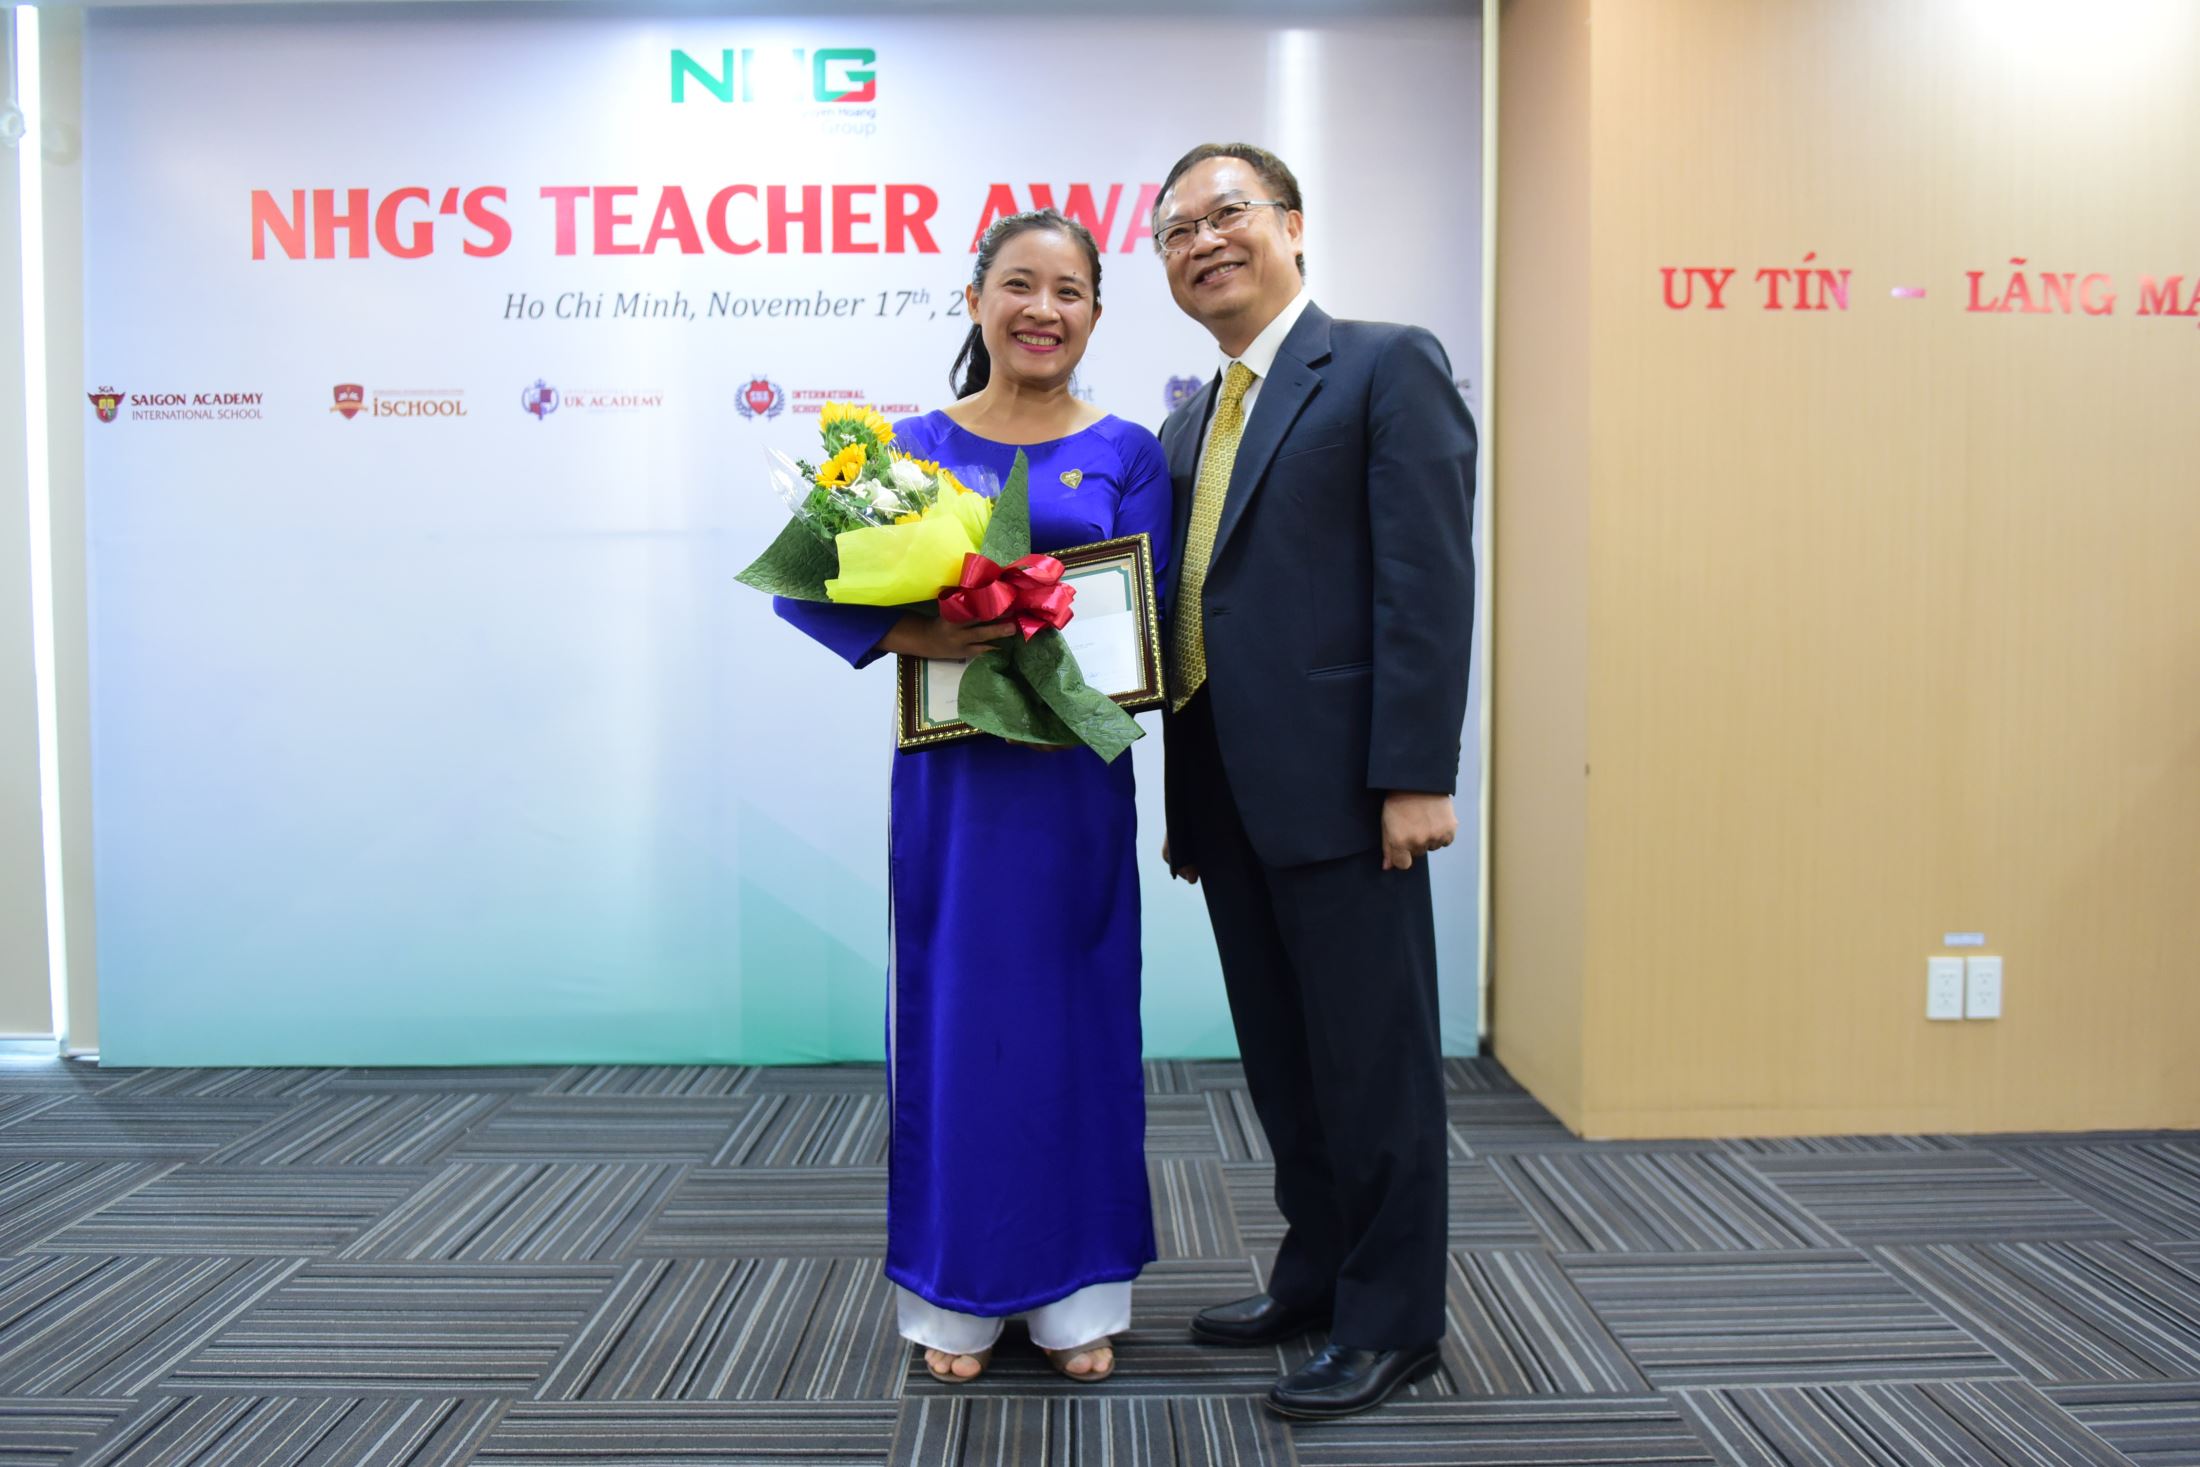 Dr. Dinh Quang Nuong rewarded 1st prize for Ms. Ngo Thi Viet Tam, teacher of SNA